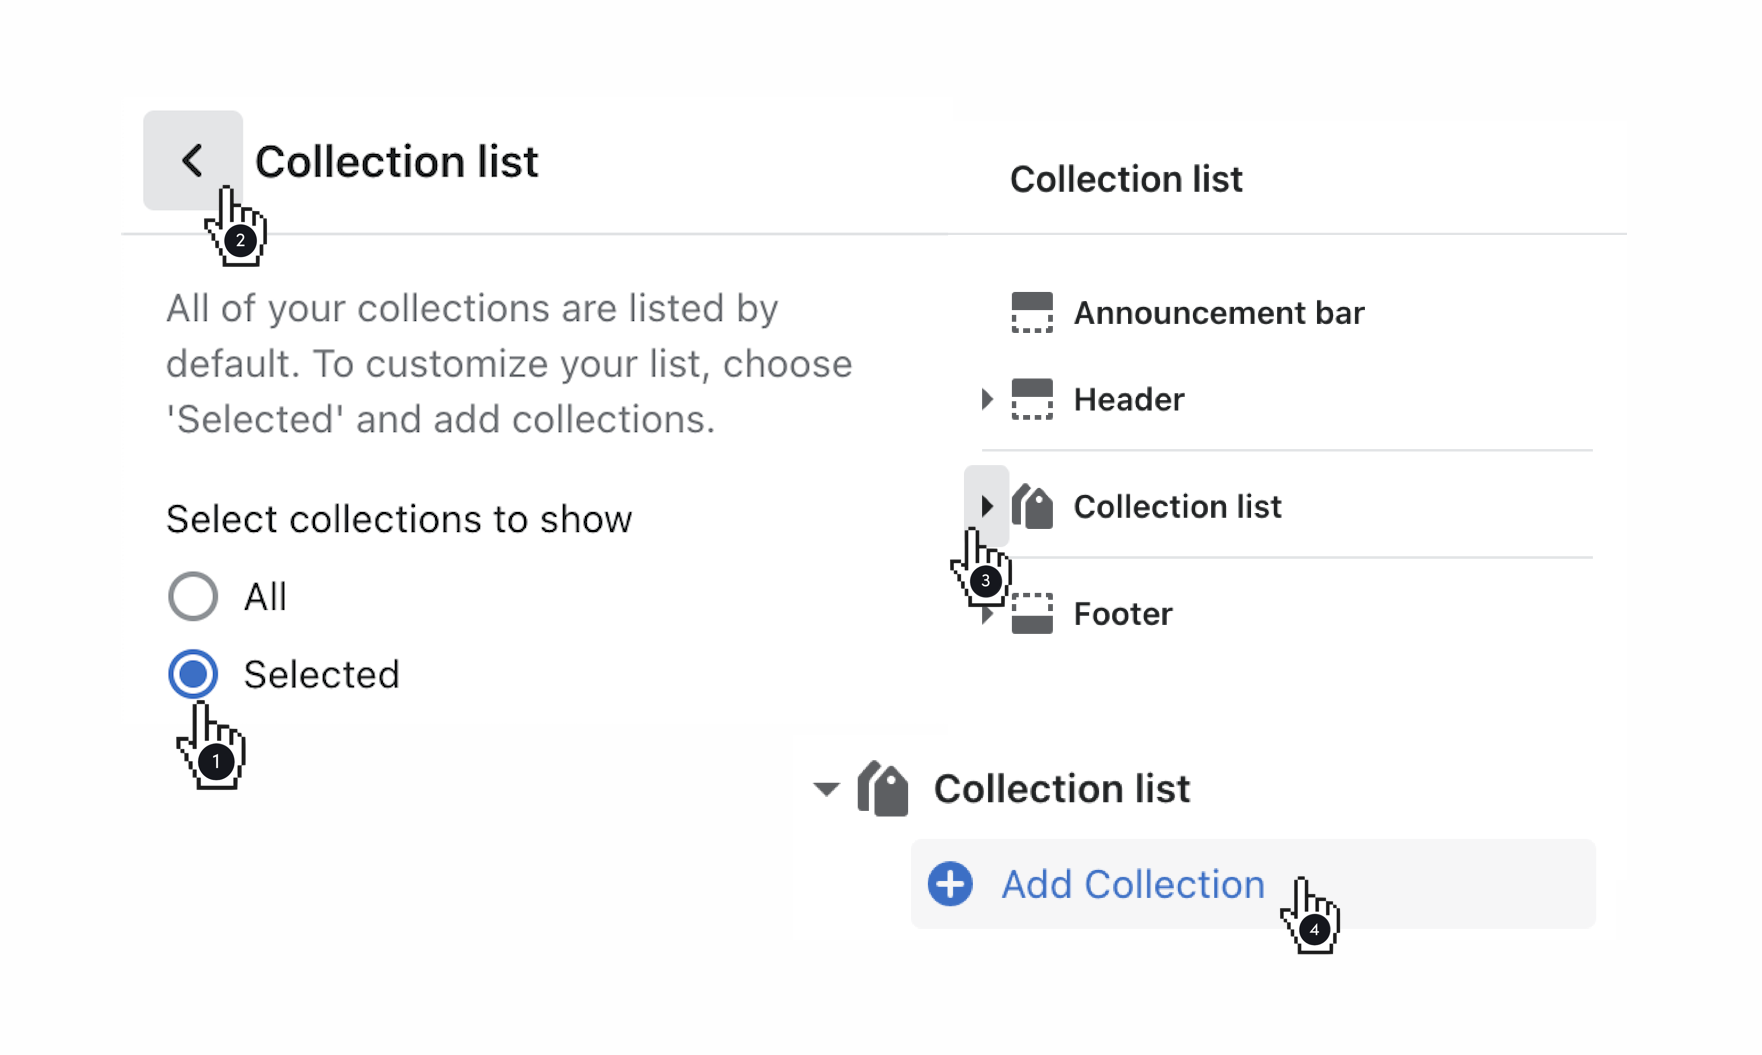 click_selected_in_collections_list_then_add_collection.png